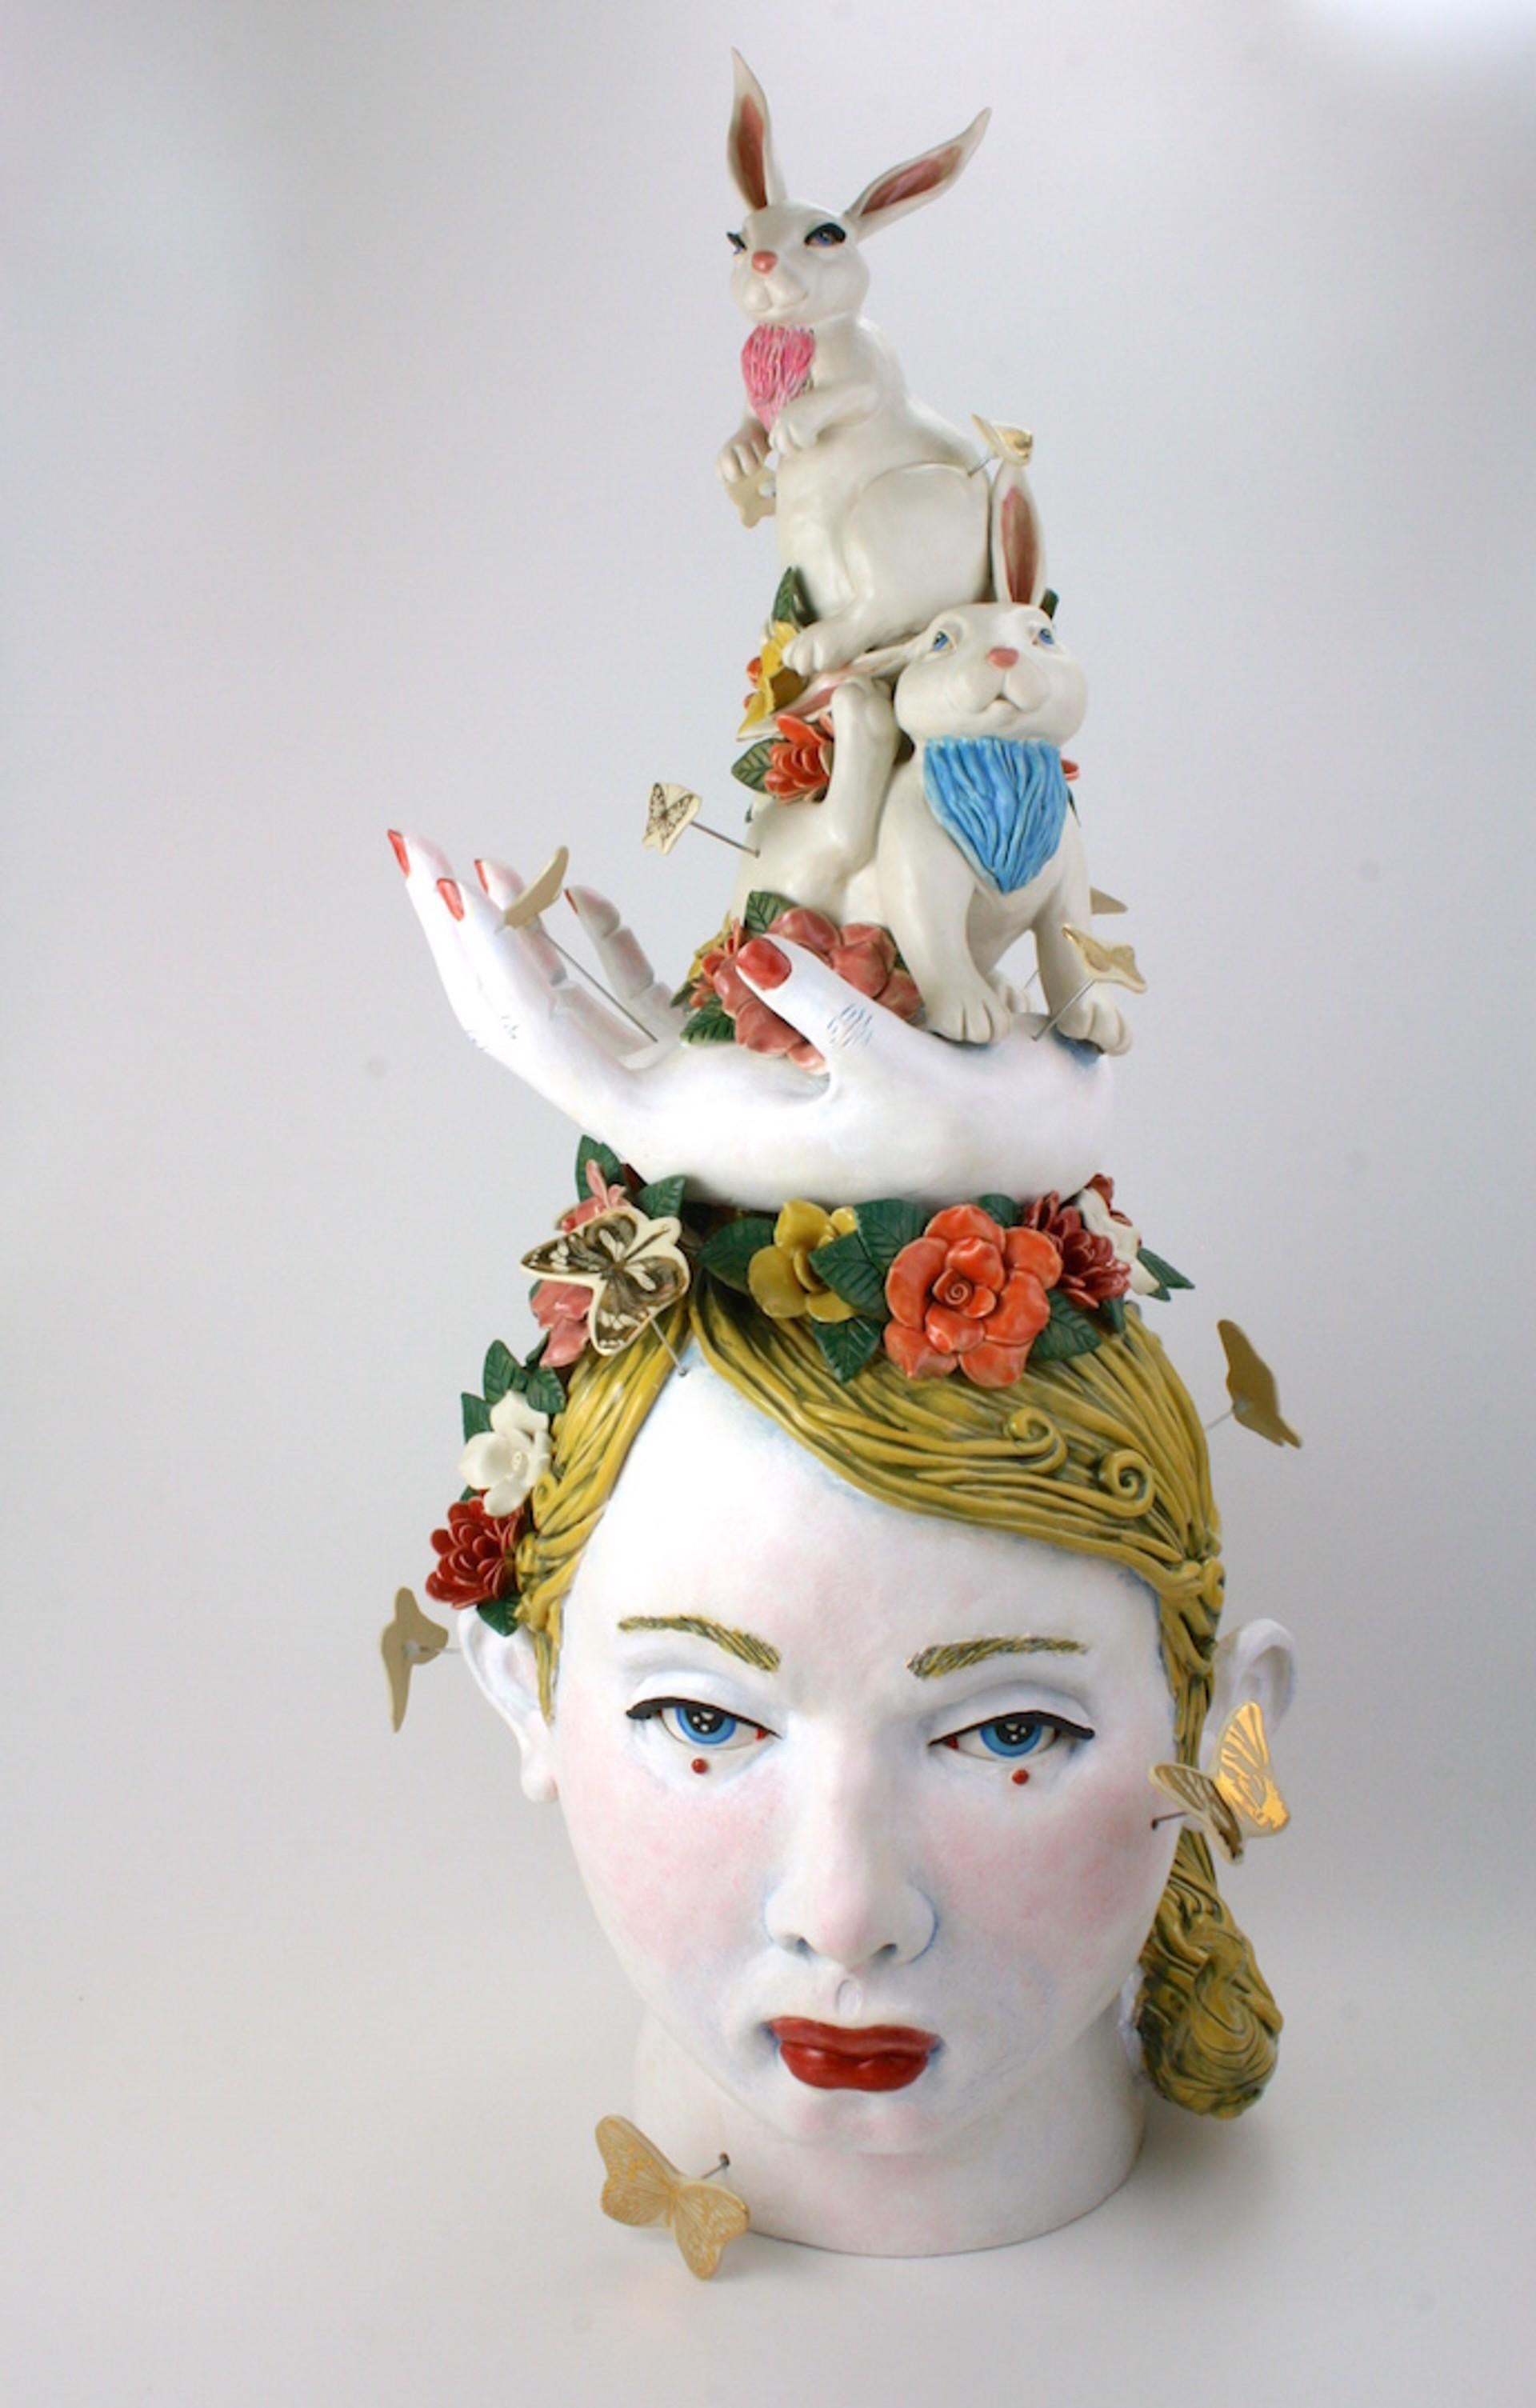 THE FUTURE IS BRIGHT - ceramic sculpture of woman with roses and rabbits - Sculpture by Taylor Robenalt